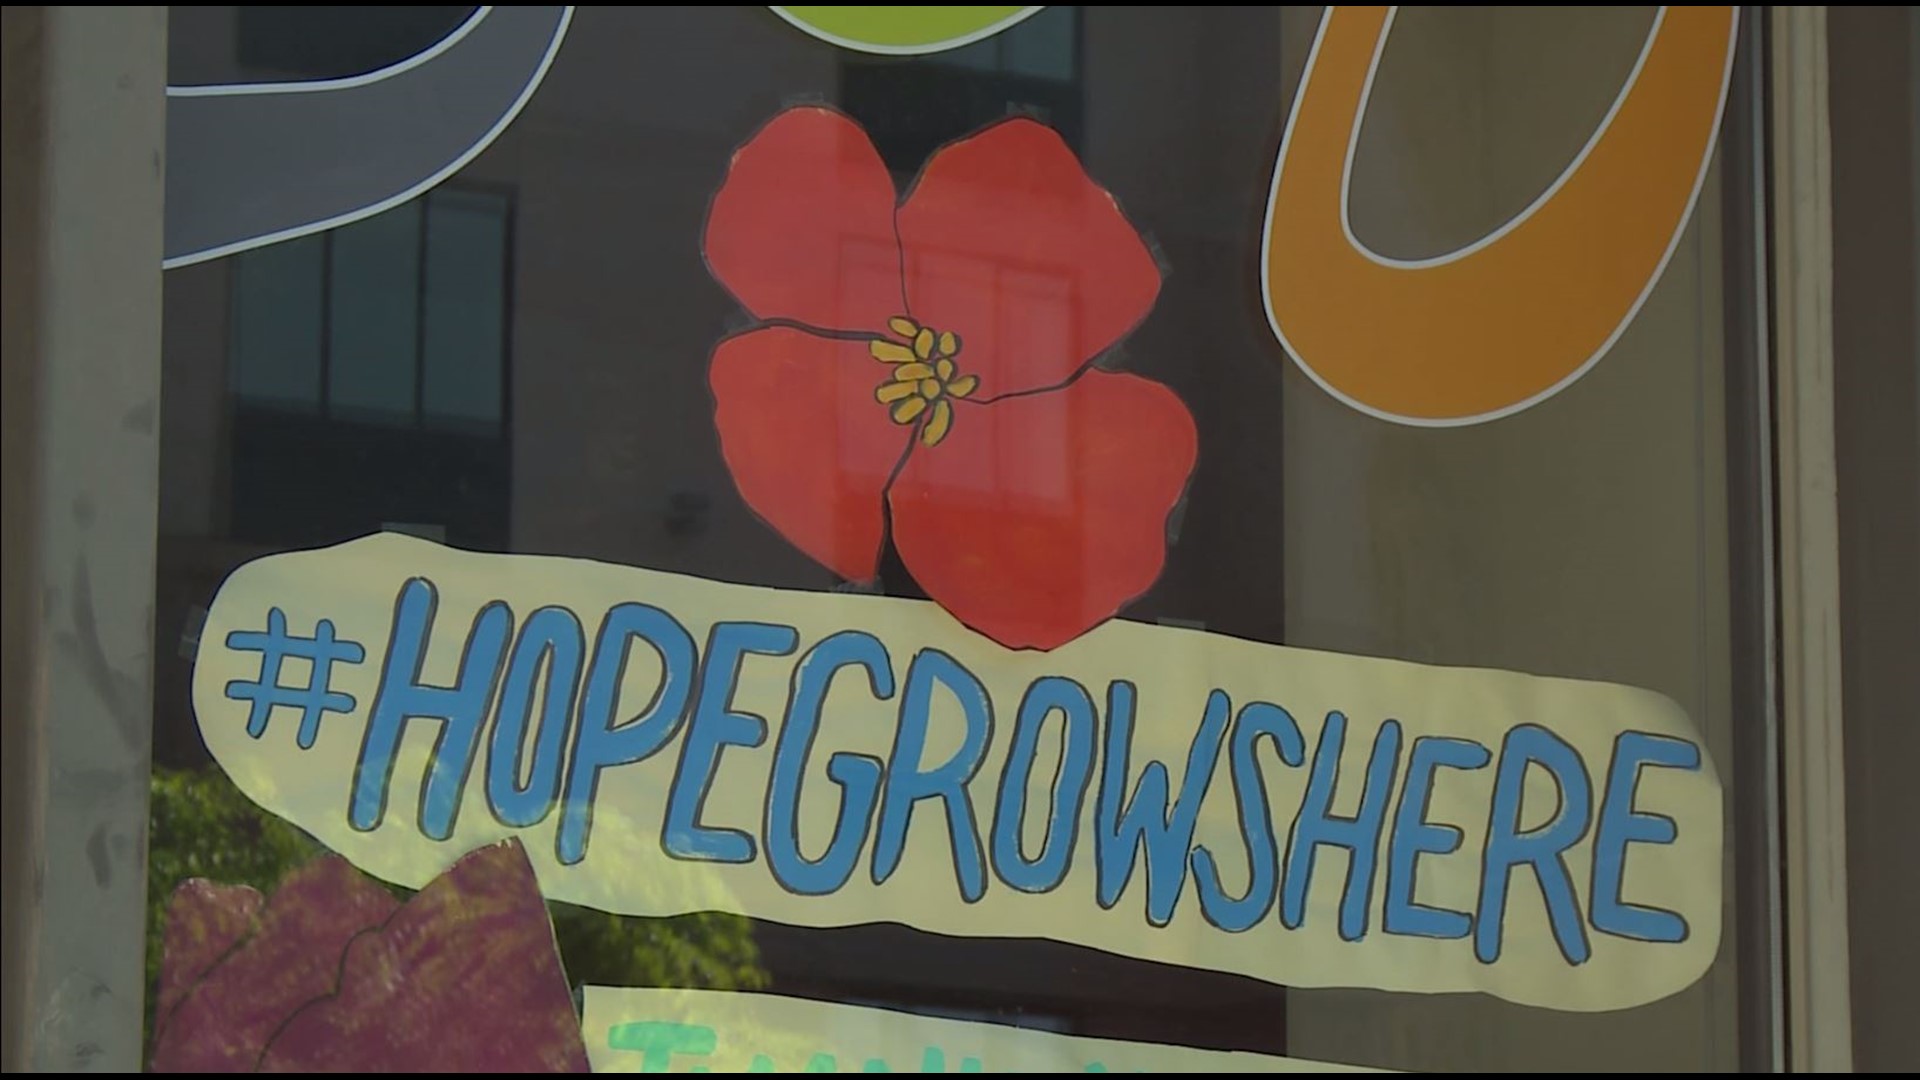 "Hope Grows Here" is a colorful campaign to promote emotional and mental health